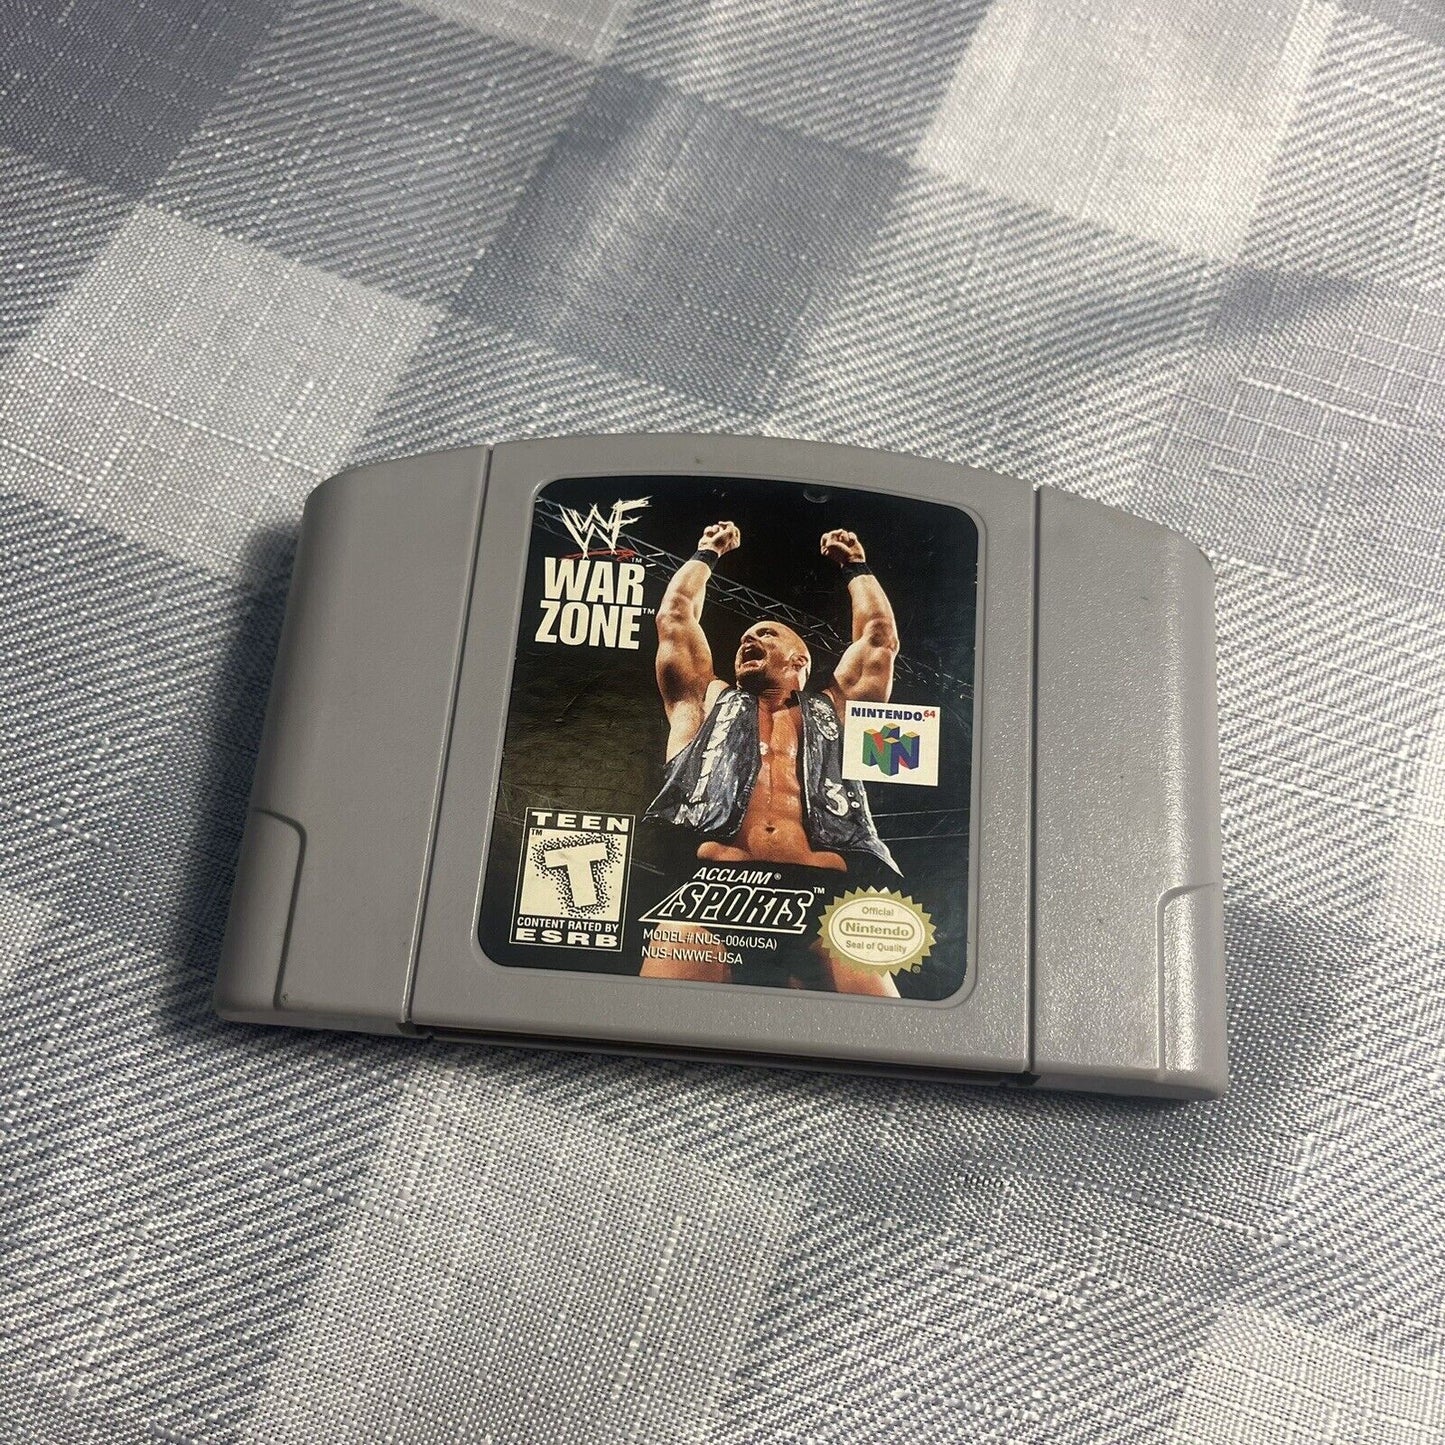 WWF War Zone - Nintendo 64 N64 Game Authentic Tested + WORKING!